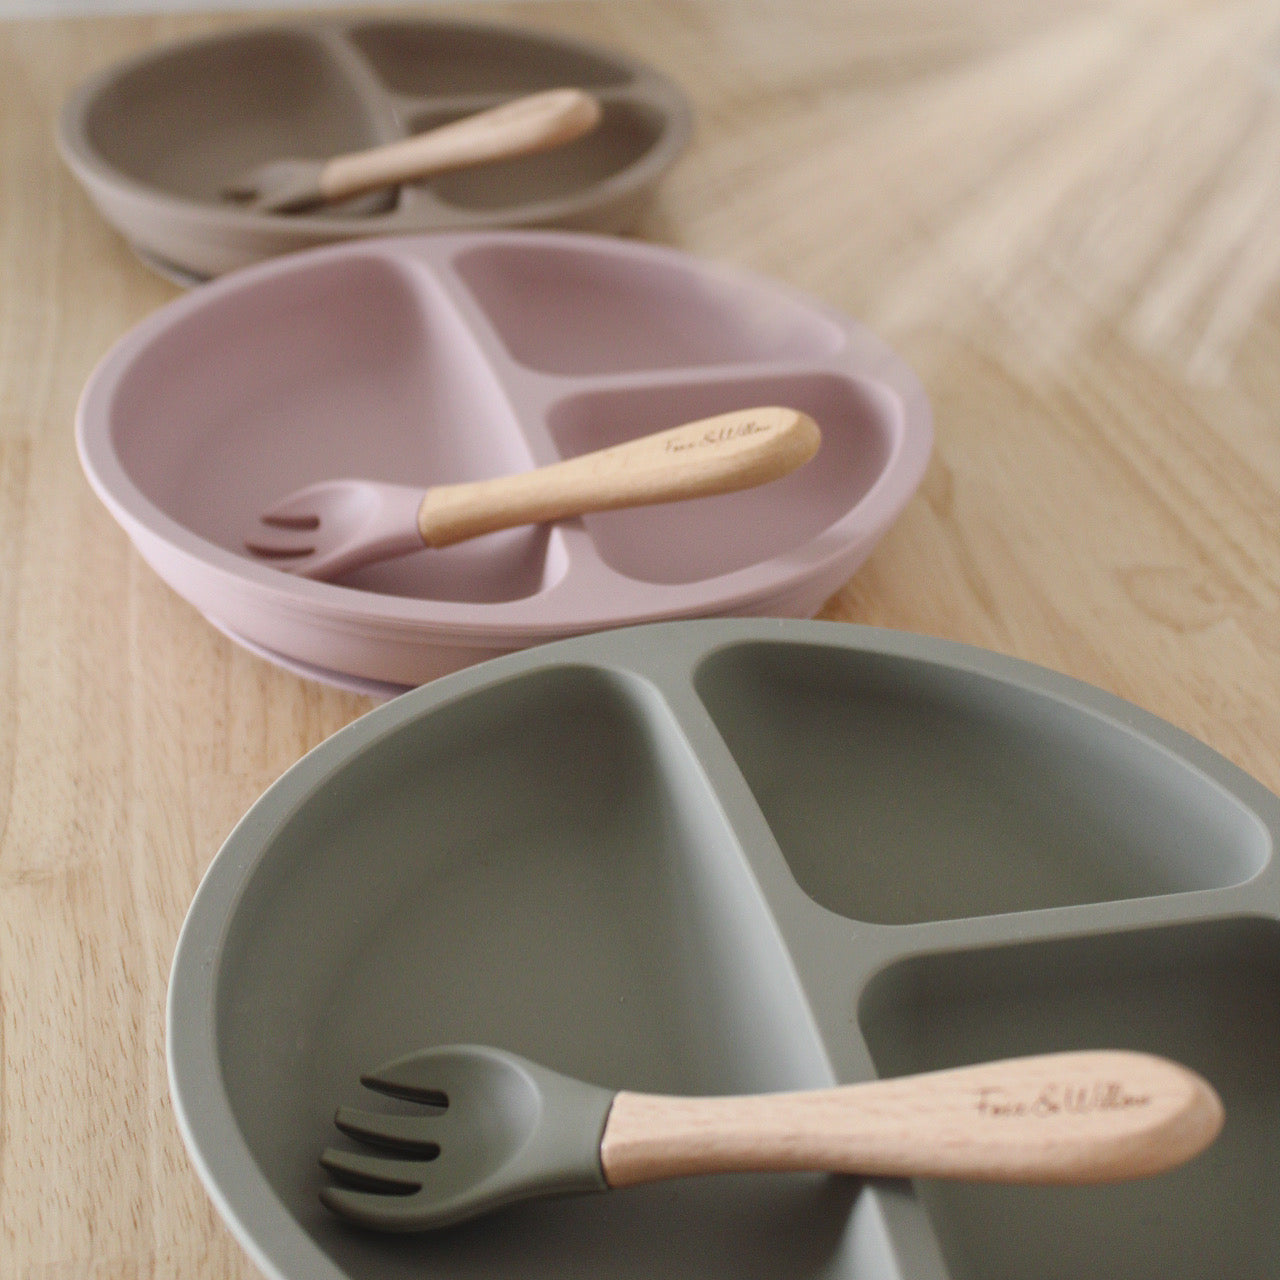 Your Plate & Fork Set - Dusty Sage